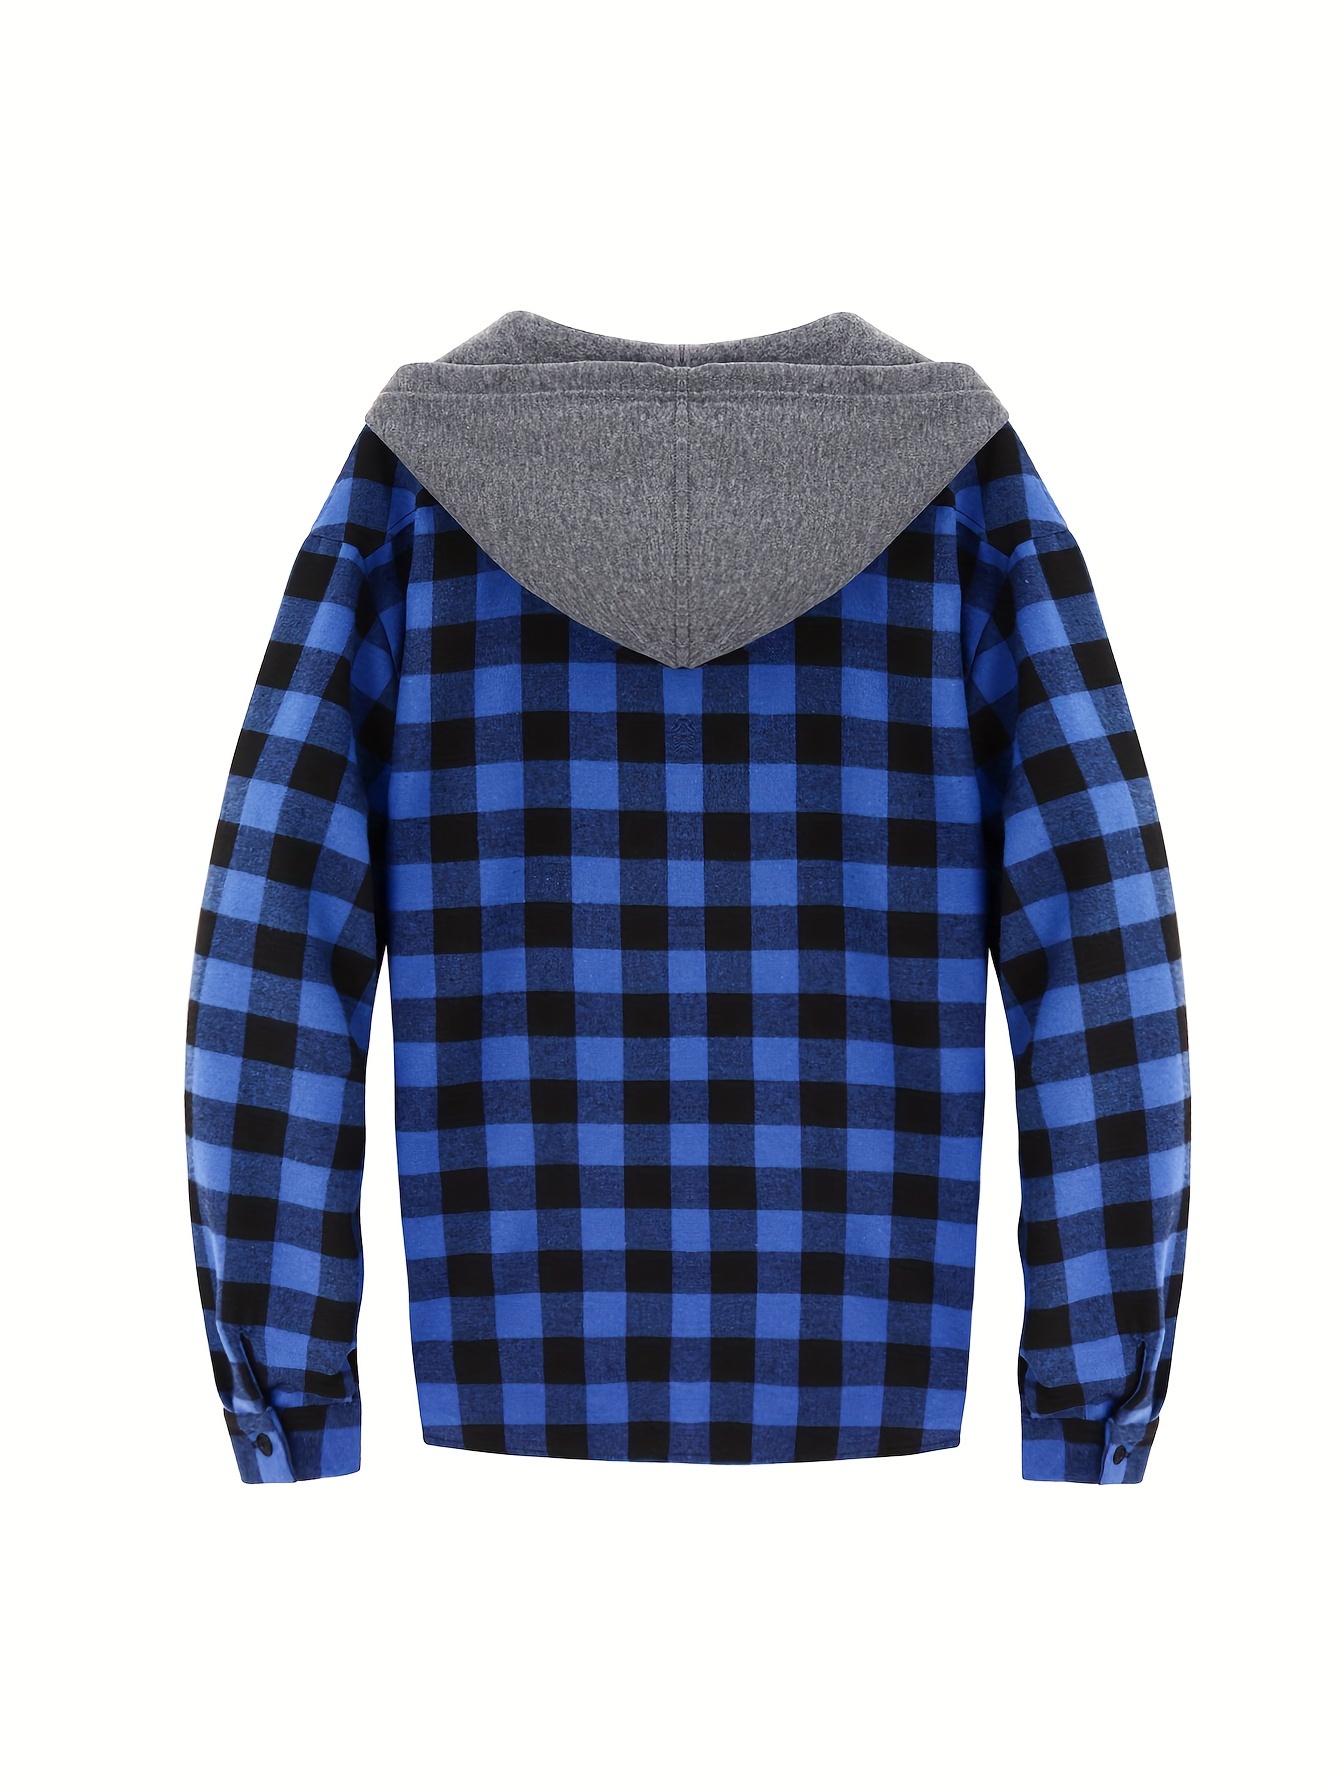 long sleeve casual regular fit button up hooded shirts jacket plaid shirt coat for men details 41